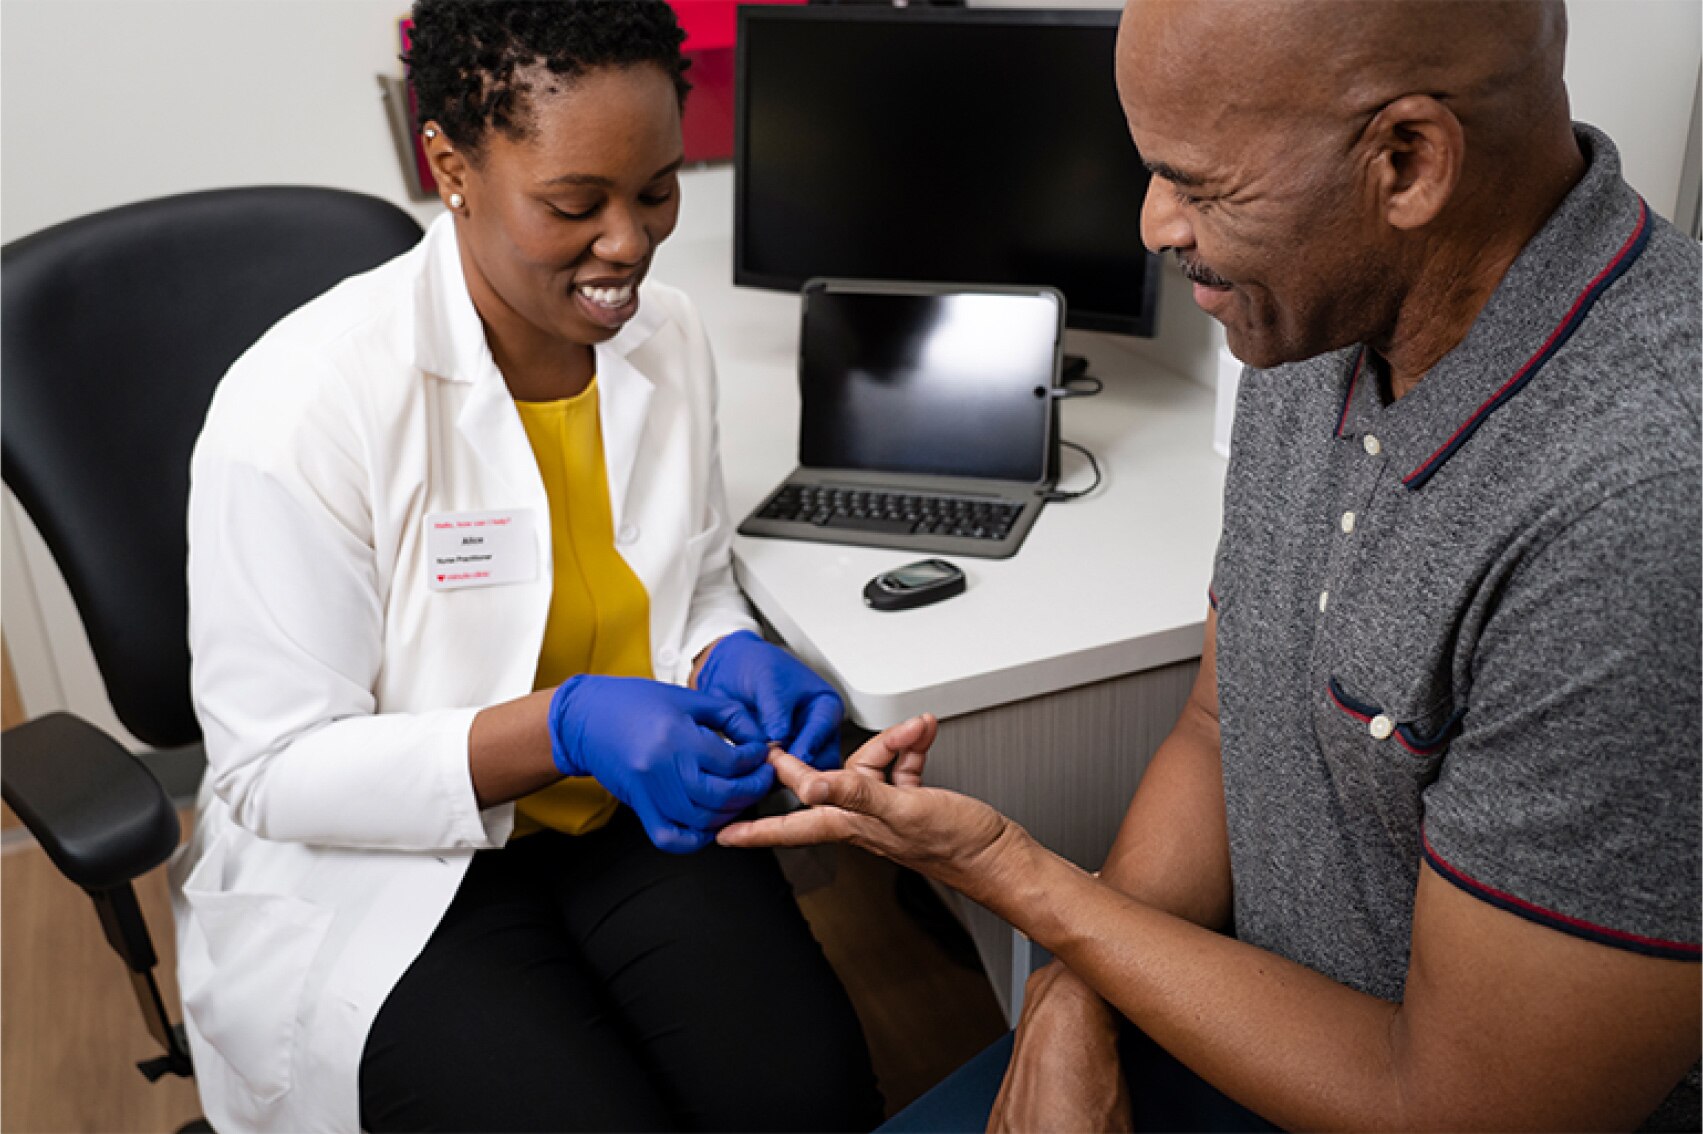 A MinuteClinic provider is putting a bandage on a patient’s finger after obtaining a blood sample for a blood glucose test in a clinical setting.